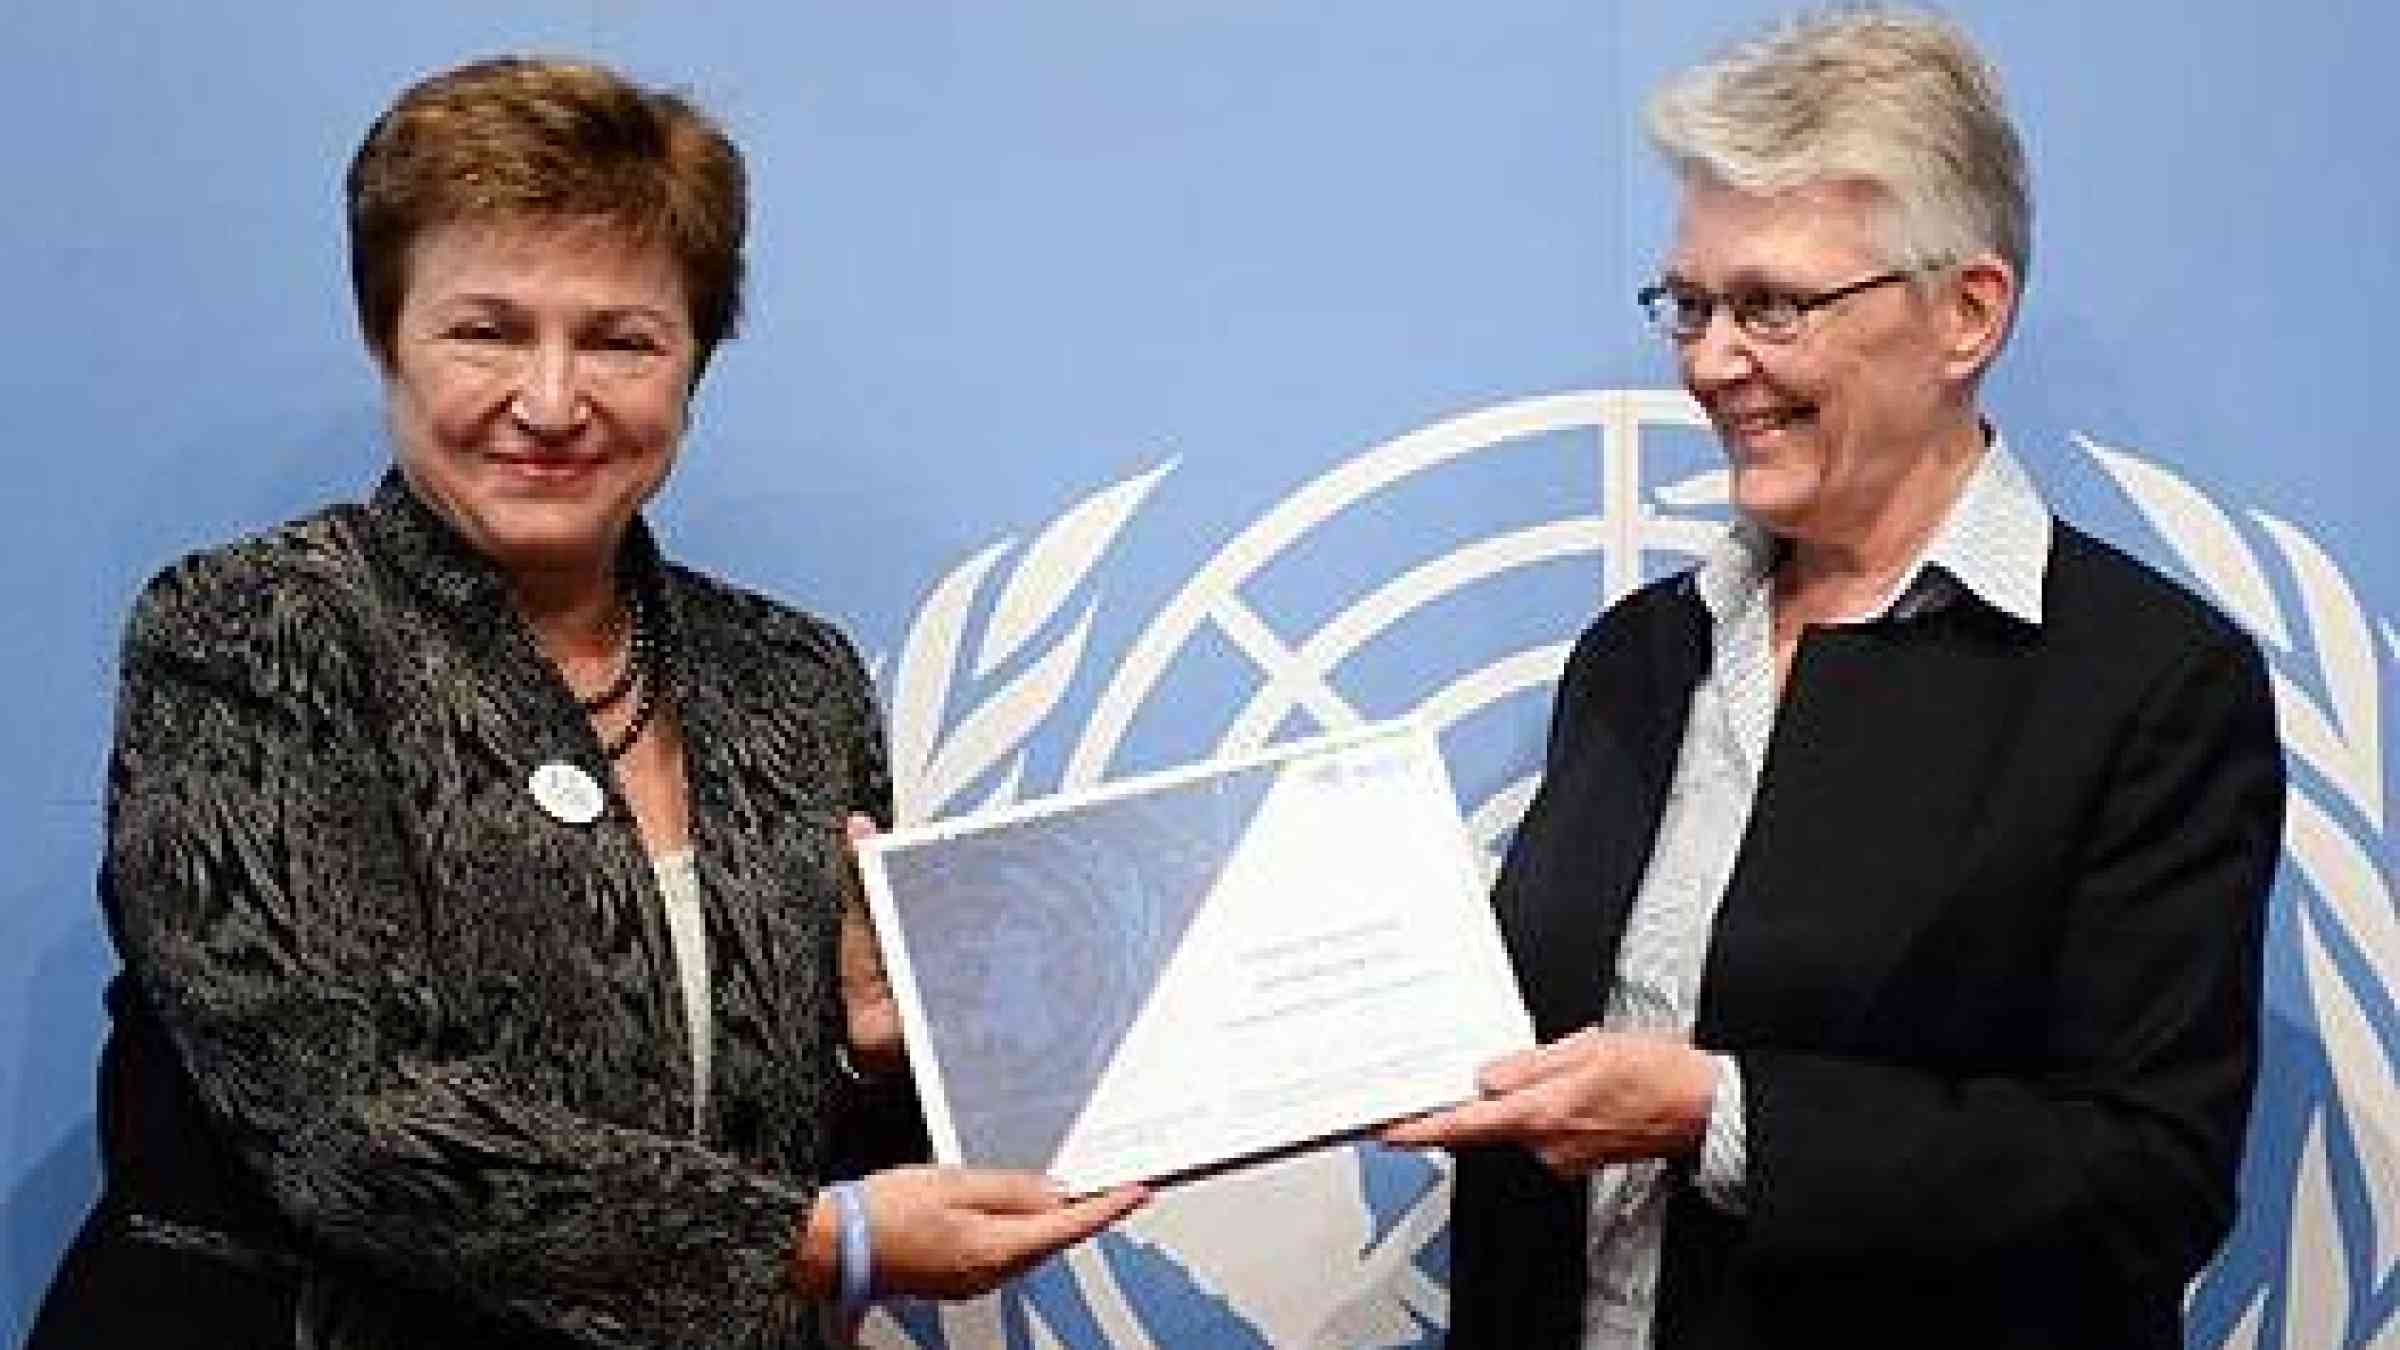 EU Commissioner Kristalina Georgieva (left) was recognised today, United Nations Day, as a Champion of Disaster Risk Reduction by UNISDR head Margareta Wahlstrom at a special ceremony in Brussels City Hall. (Photo: UNISDR)